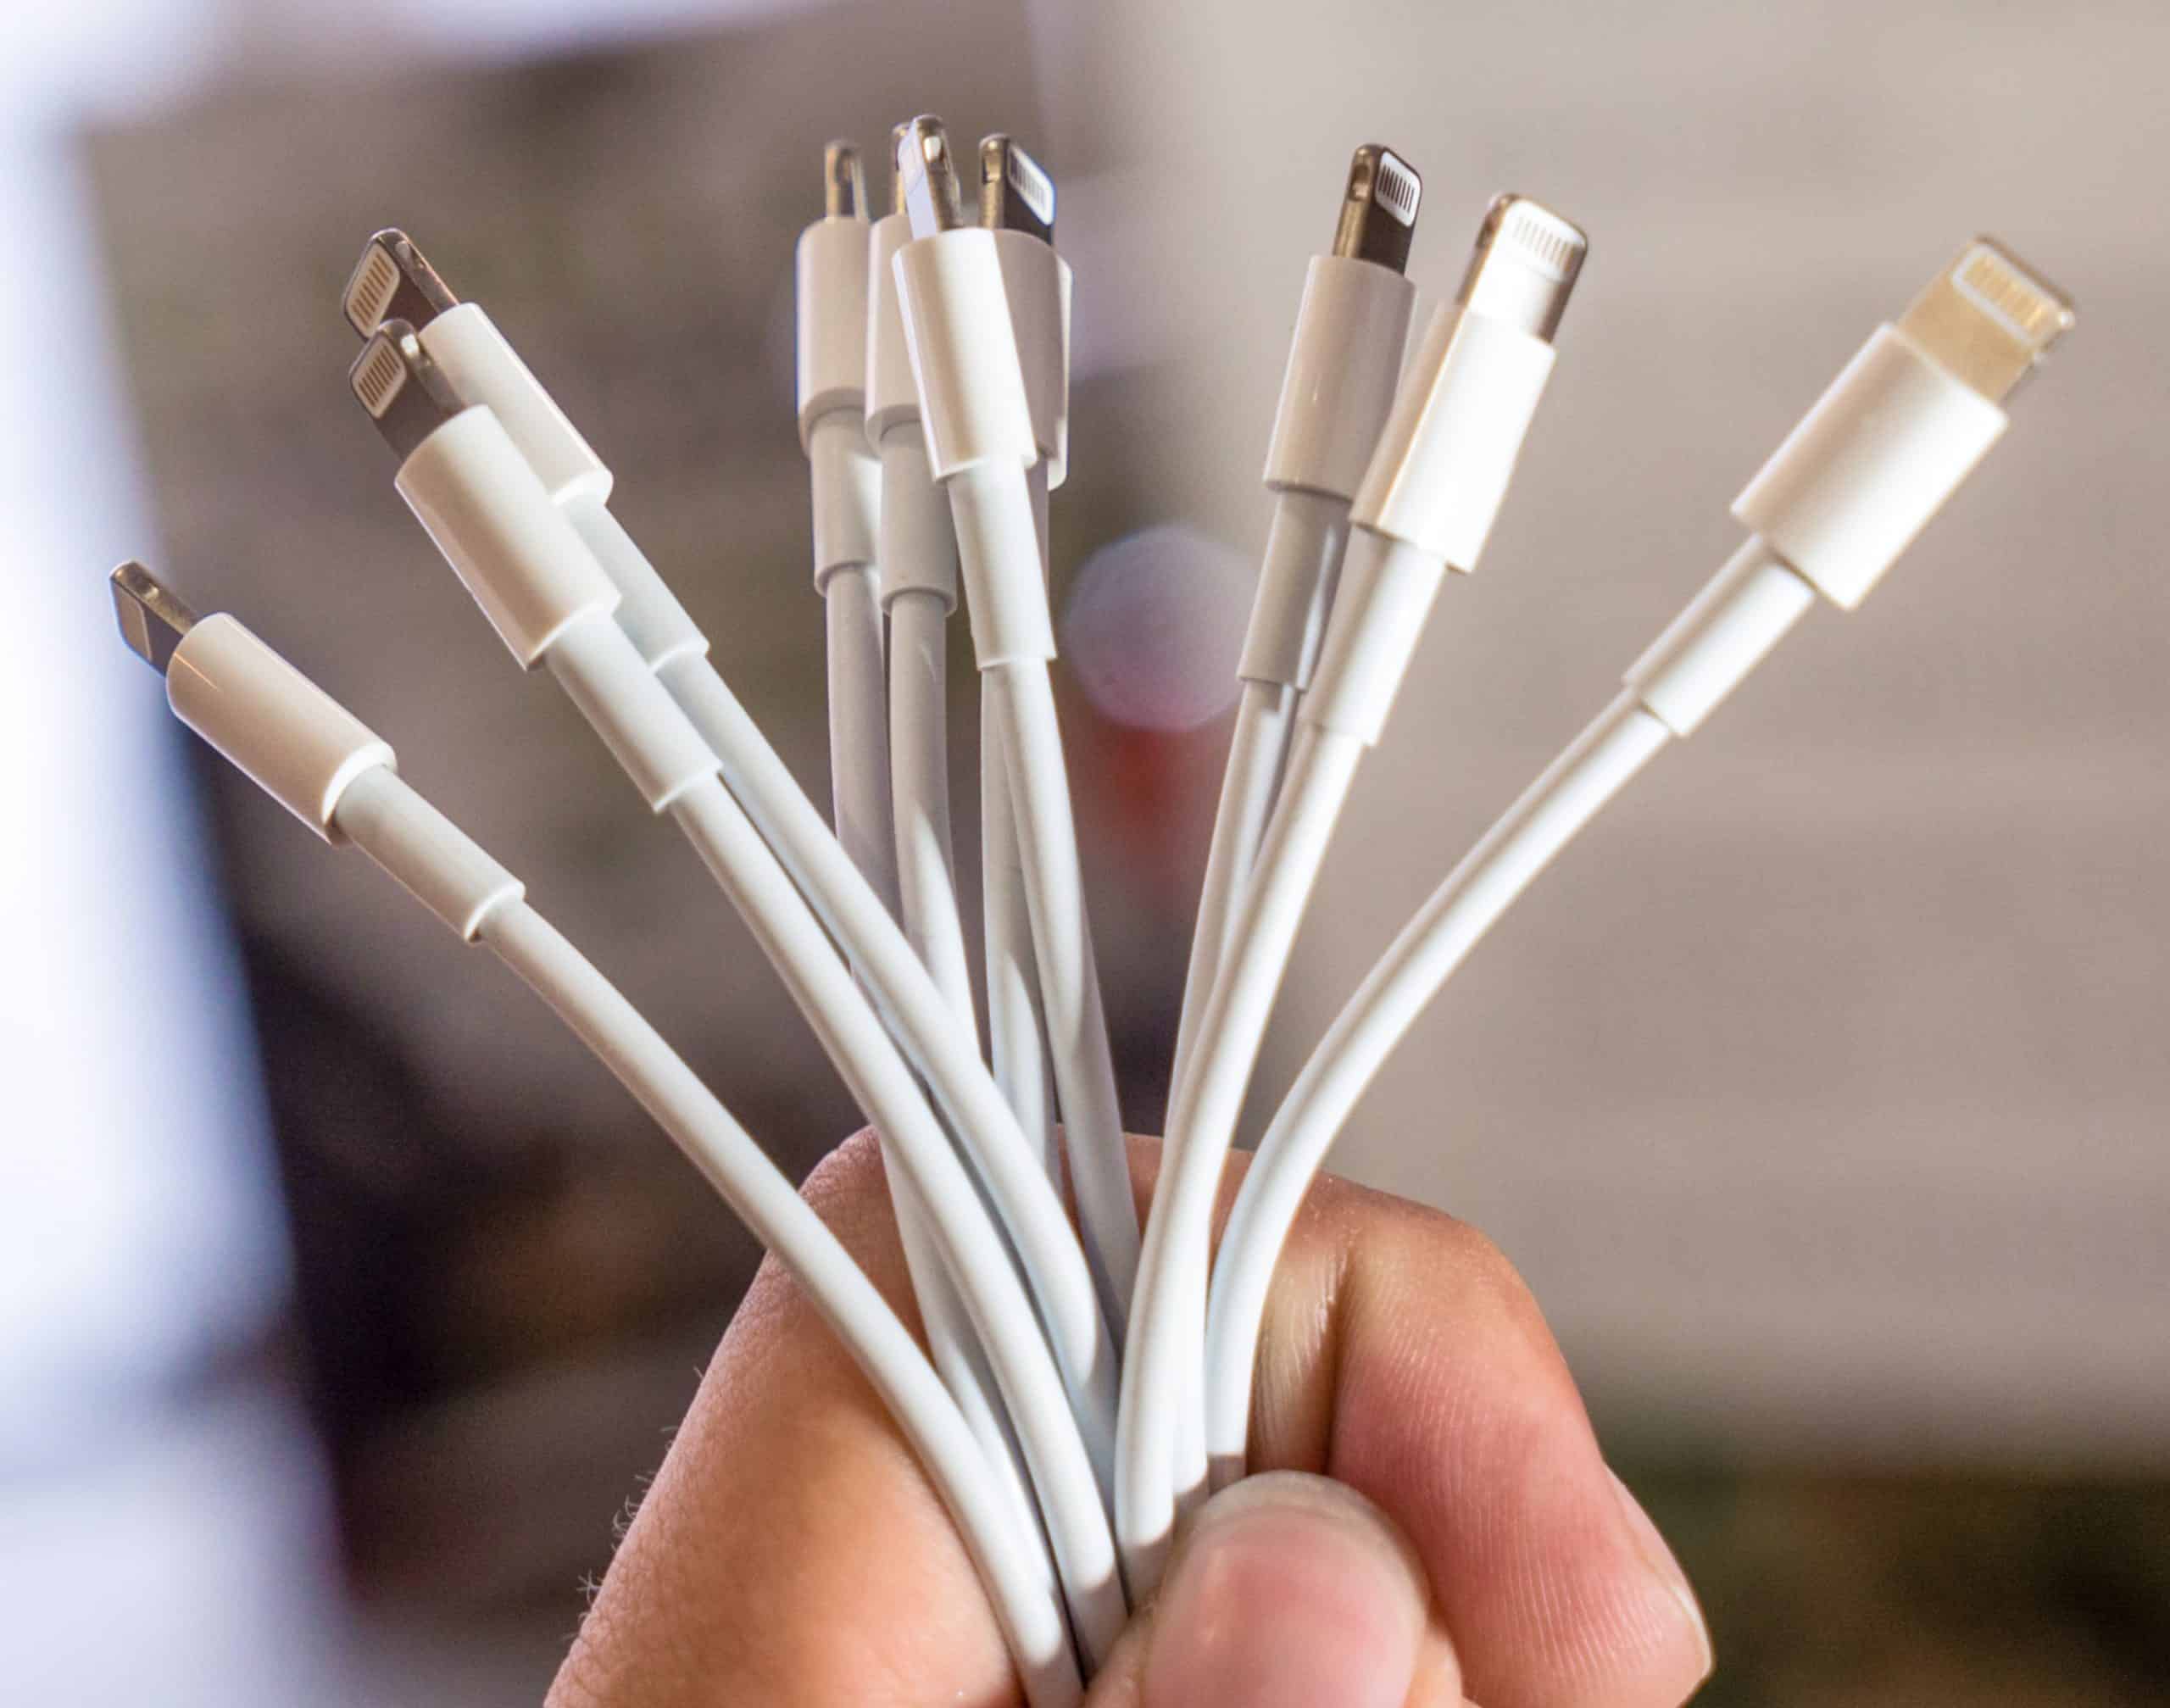 Why Are iPhone Charging Cords So Short? Our Research Says